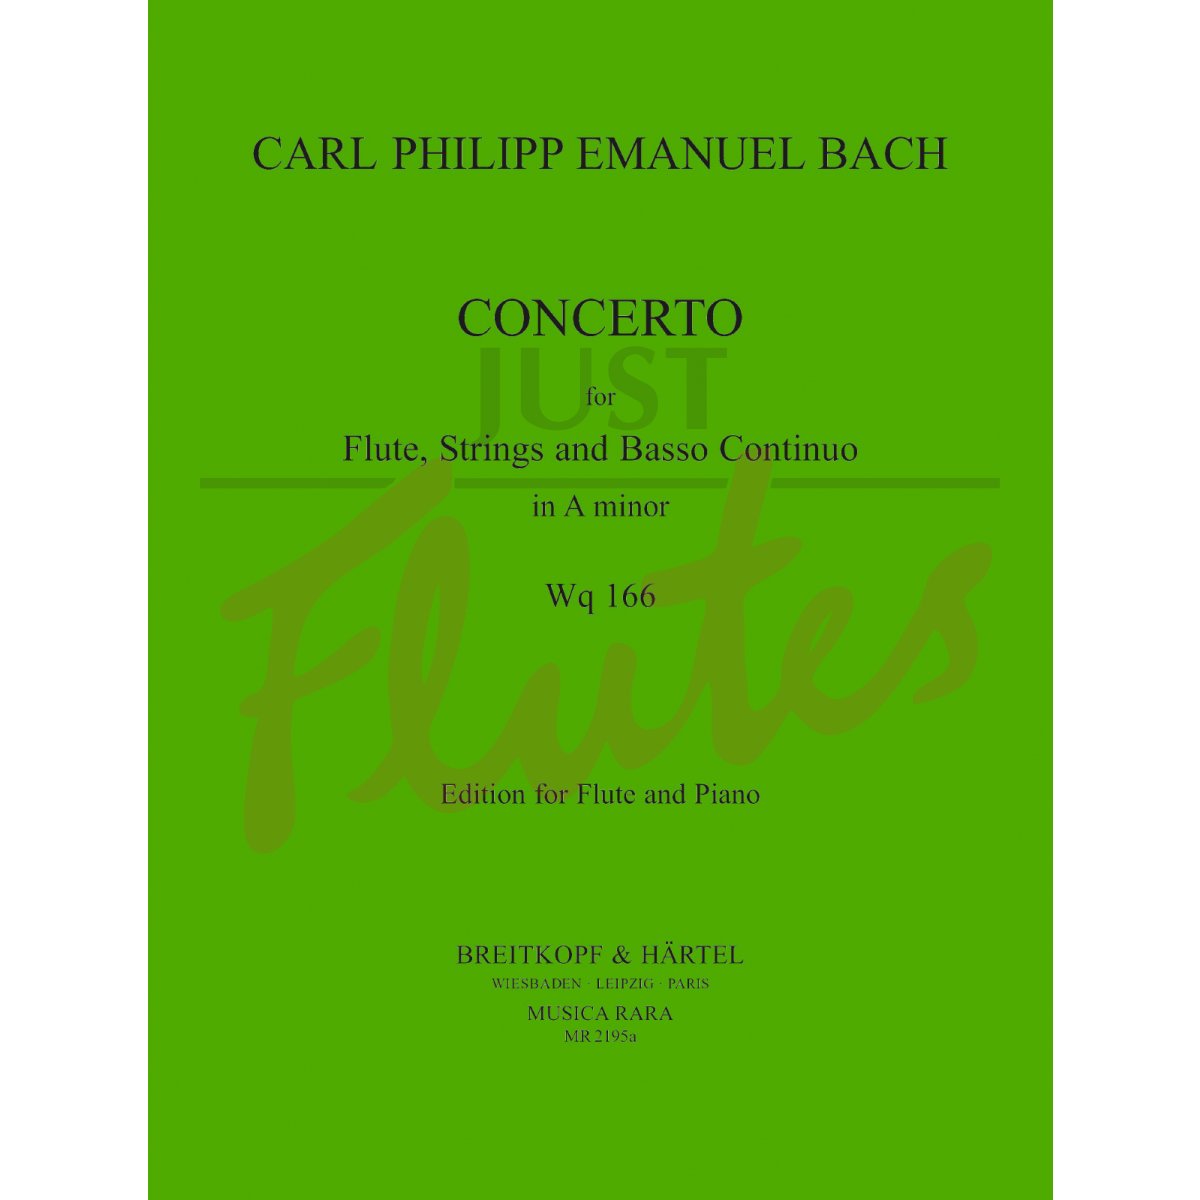 Concerto in A minor for Flute, Strings and Basso Continuo